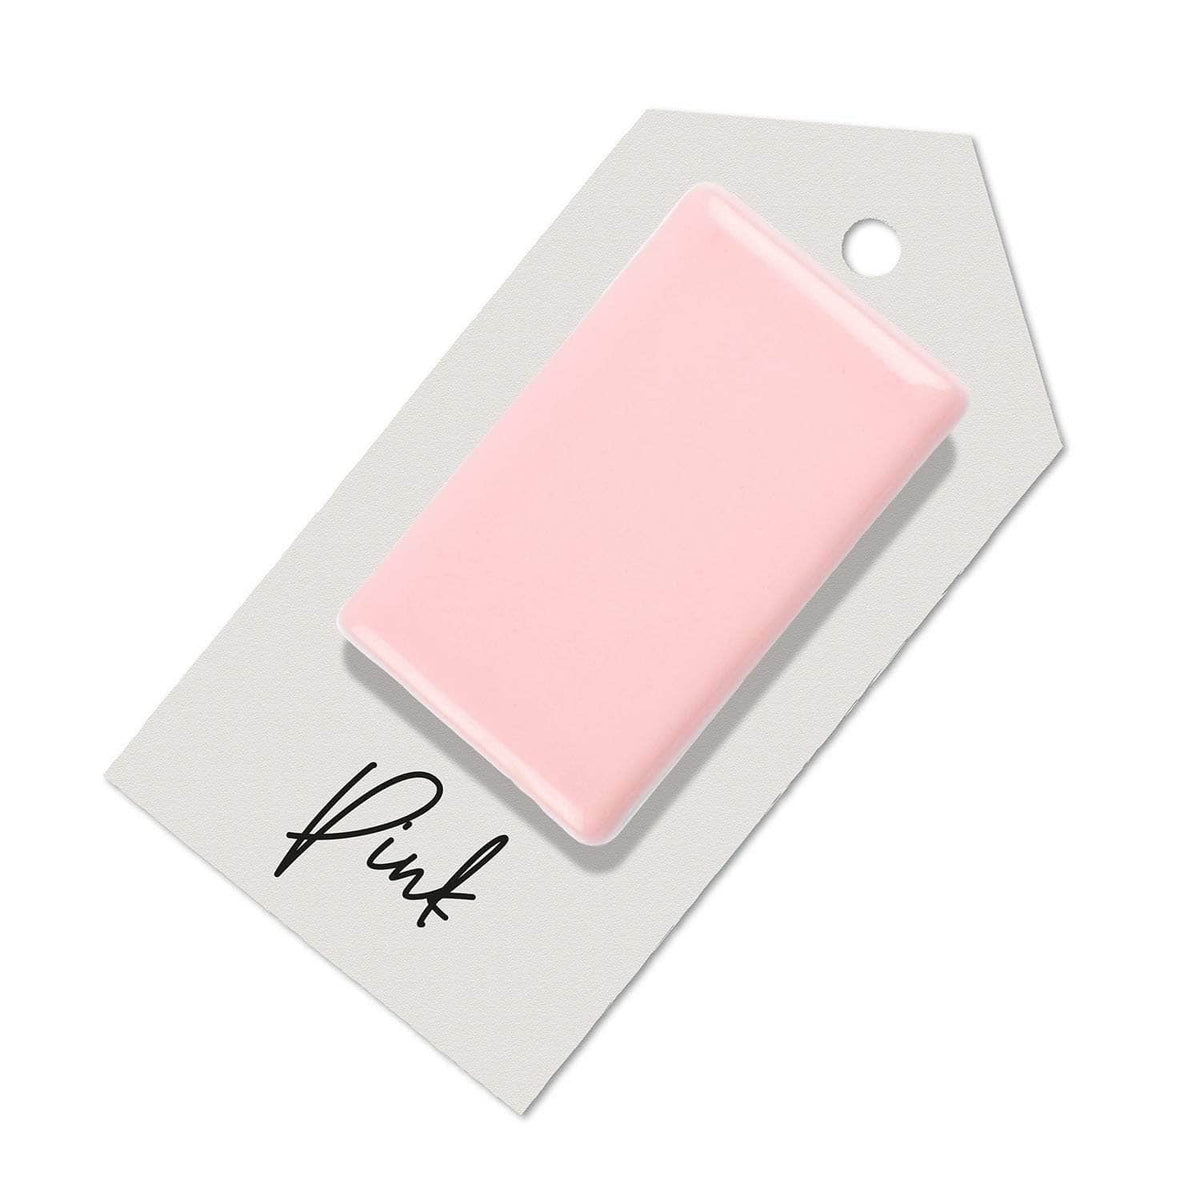 Pink sample for Aga range cooker re-enamelling &amp; reconditioned cookers